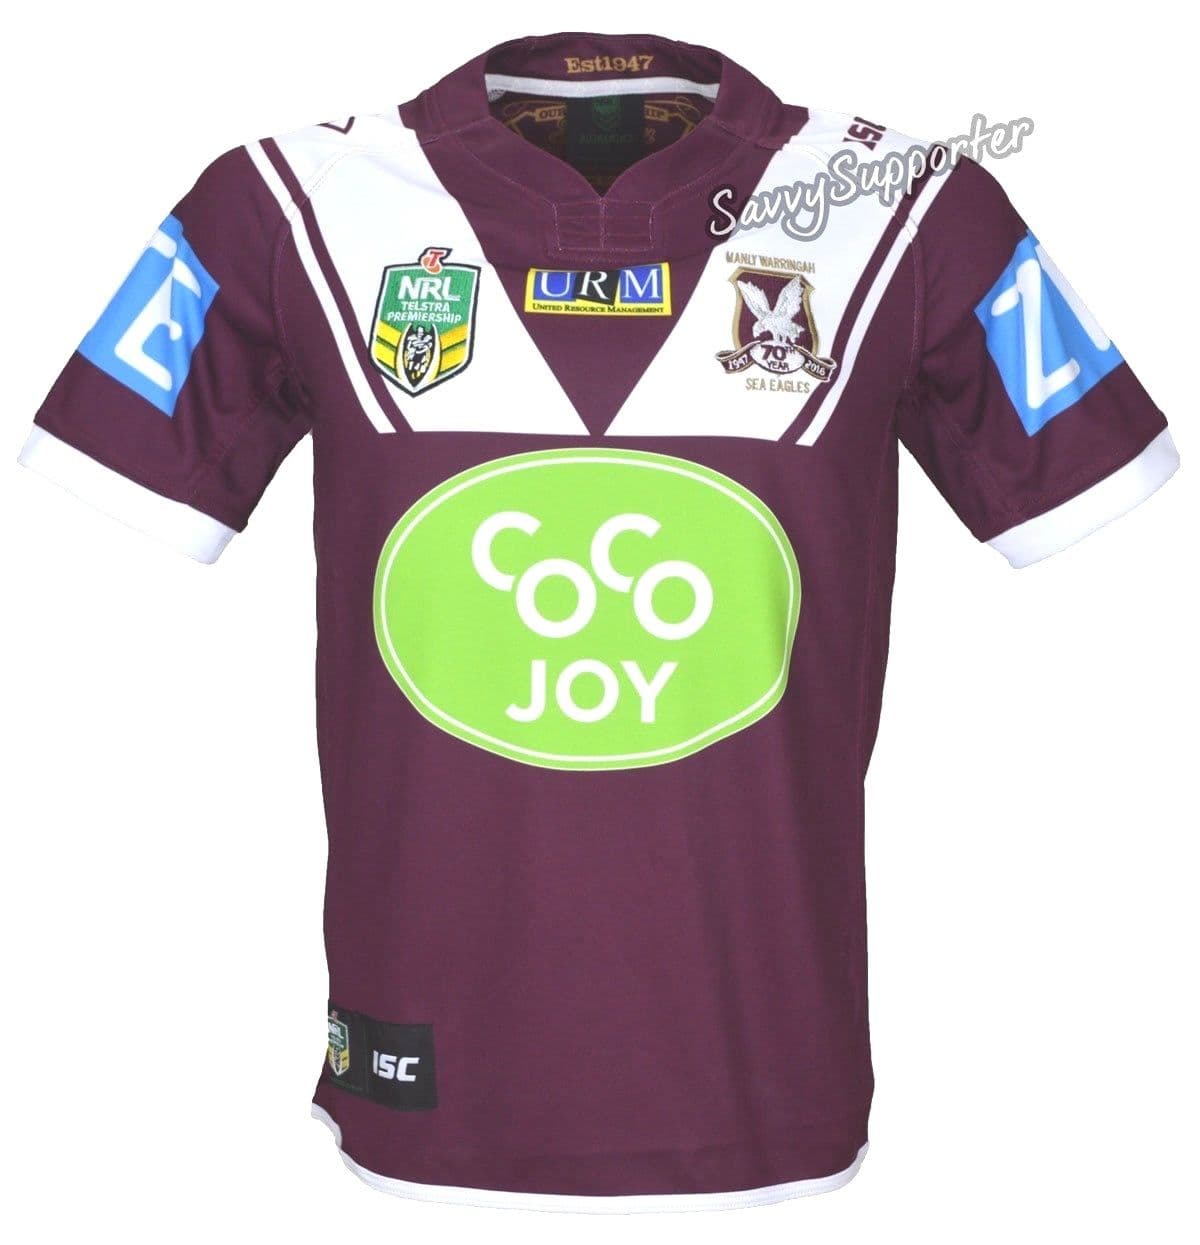 Manly Sea Eagles 2018 NRL Home Jersey Mens Ladies Kids Toddler Sizes 